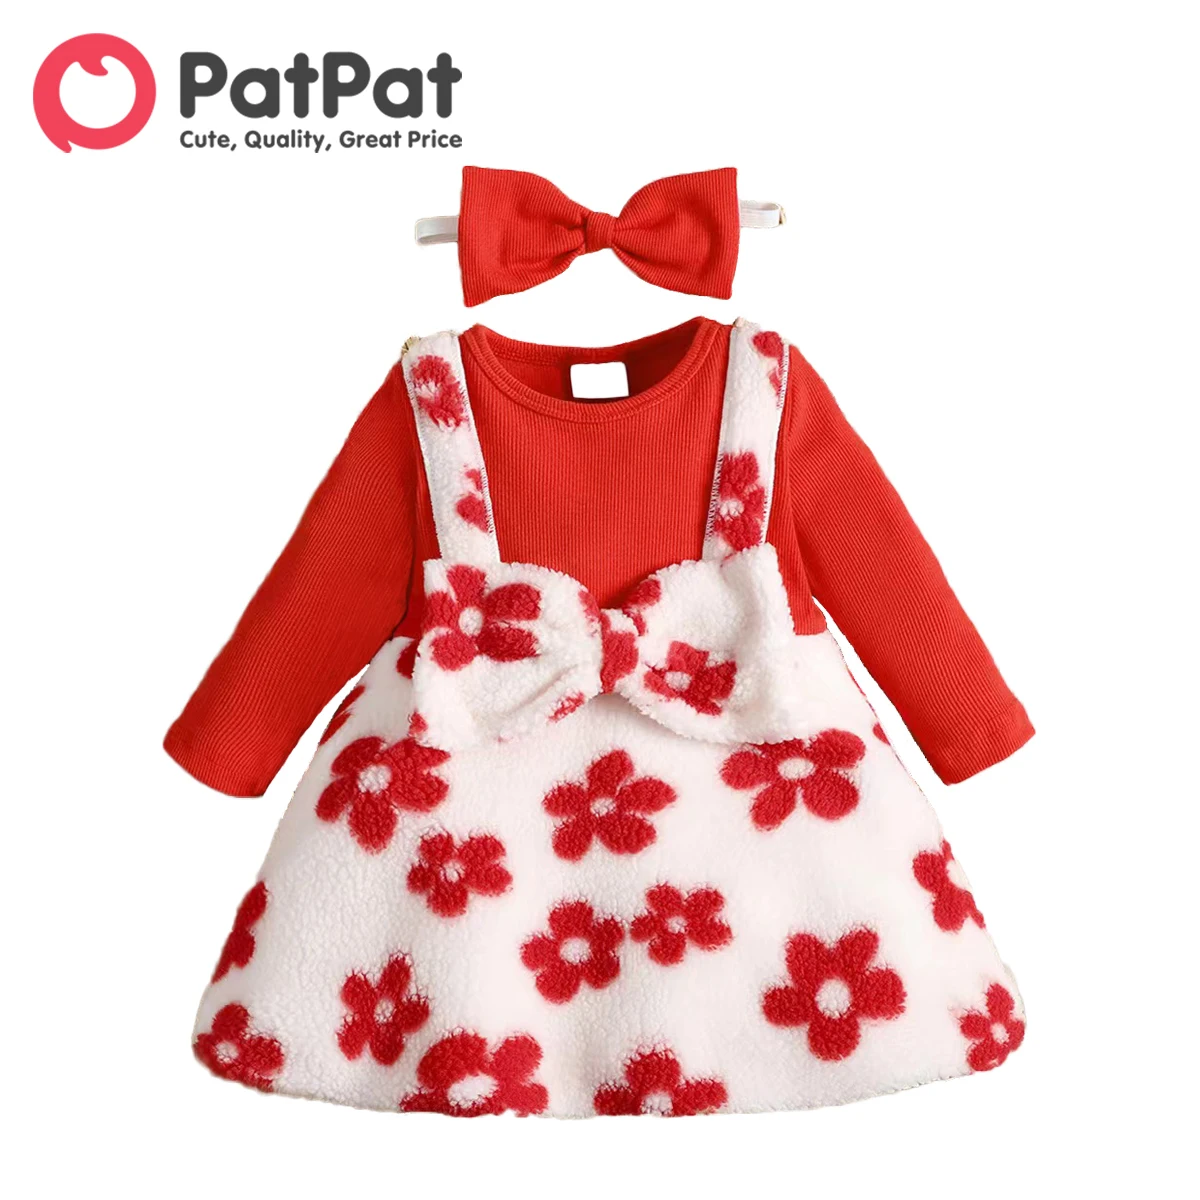 

PatPat 2pcs Baby Girl Red Ribbed Long-sleeve Spliced Floral Sherpa Fleece Bow Front Dress with Headband Set